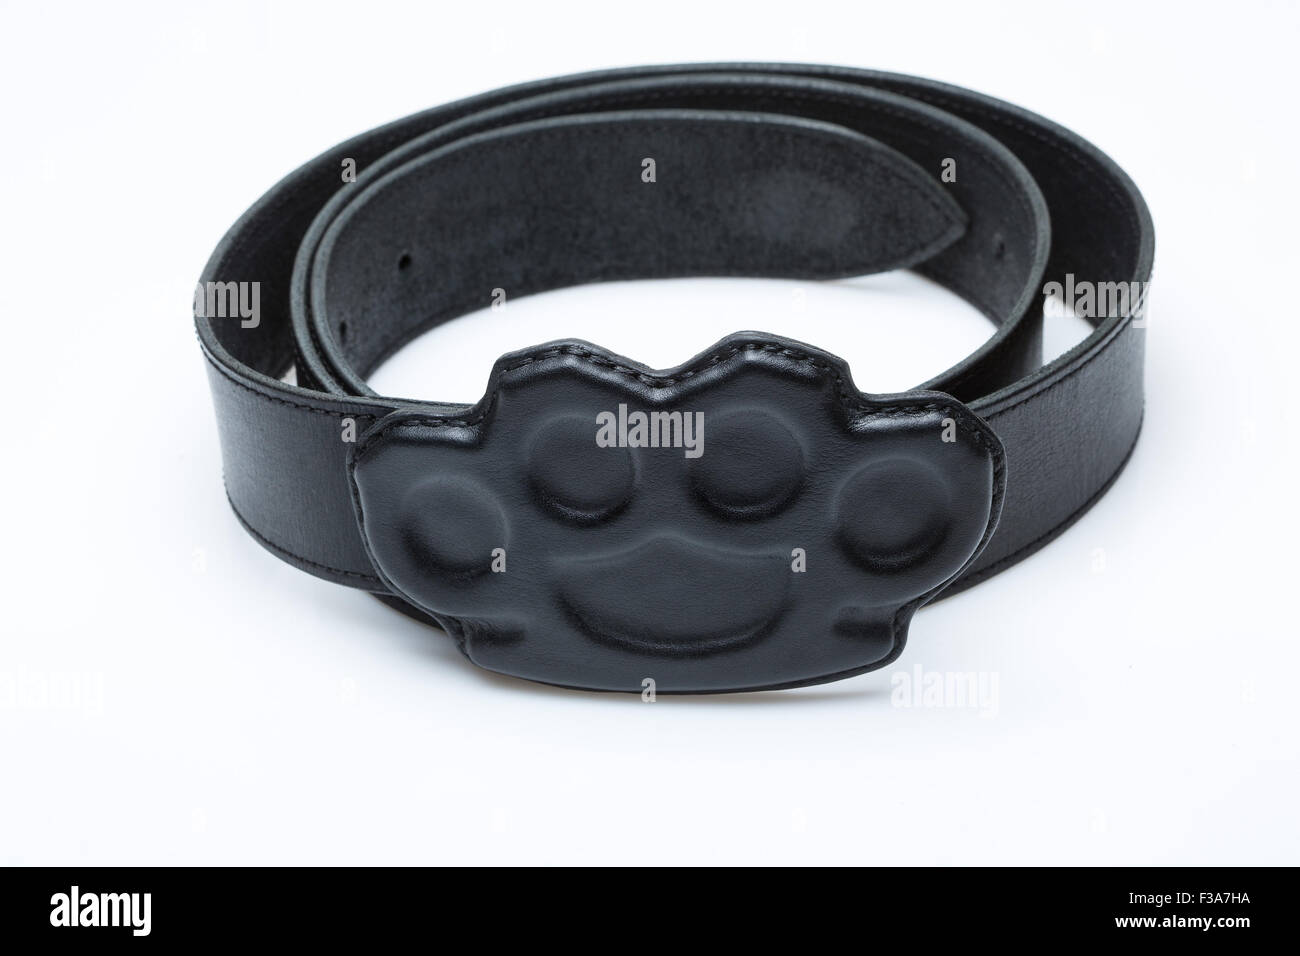 black belt with a buckle in the form of brass knuckles Stock Photo